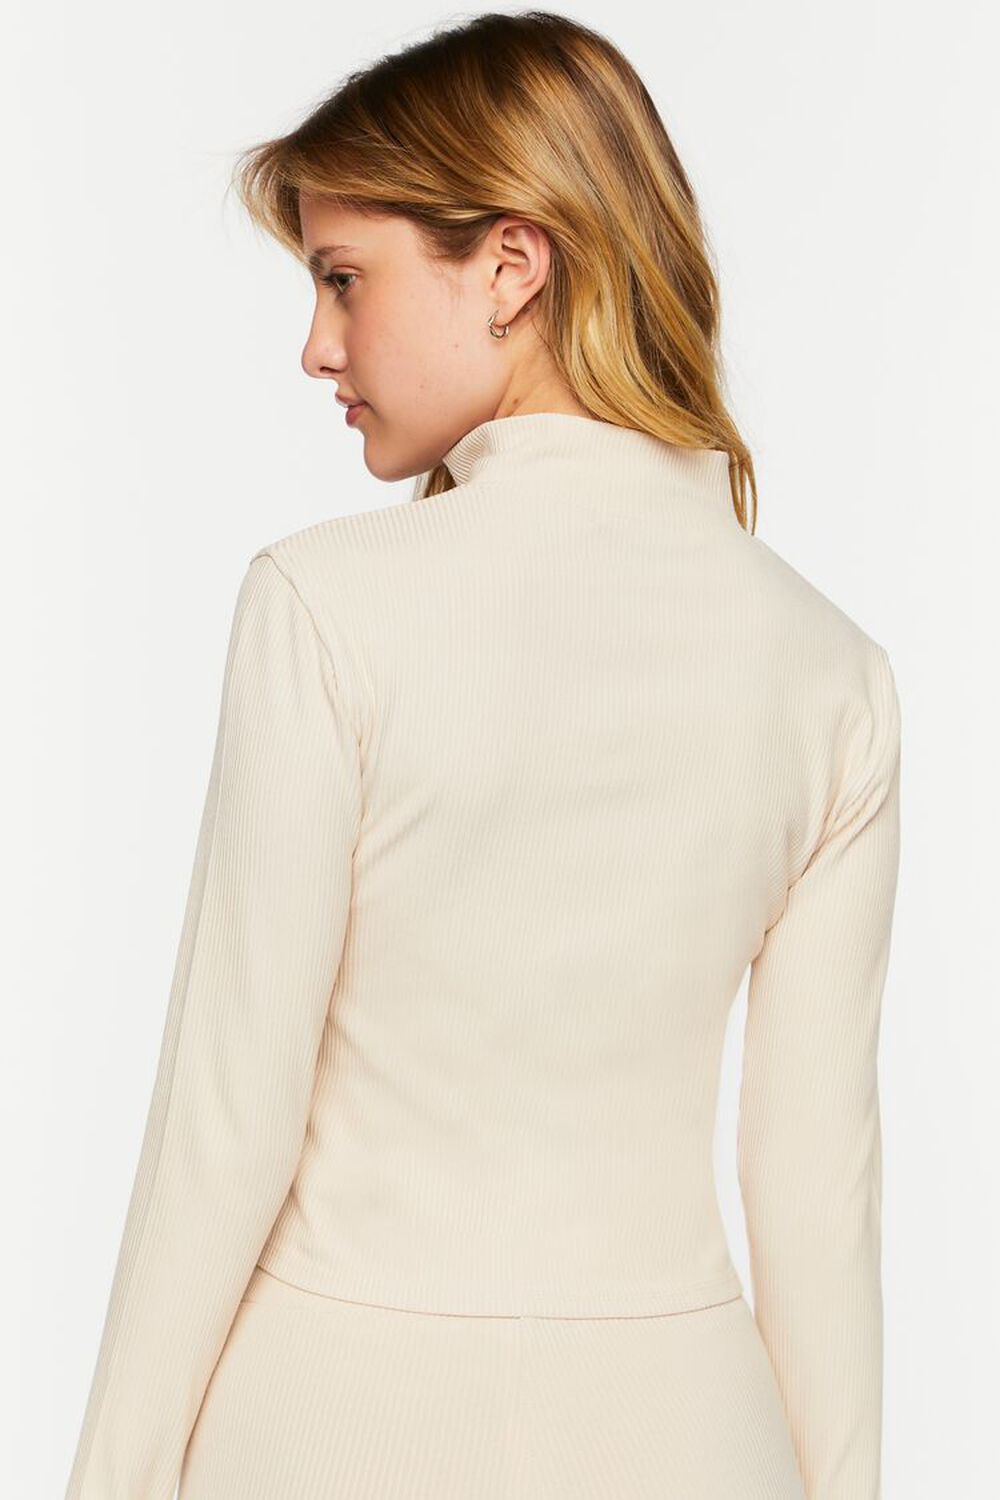 WINTER WHEAT Ribbed Zip-Up Top, image 3